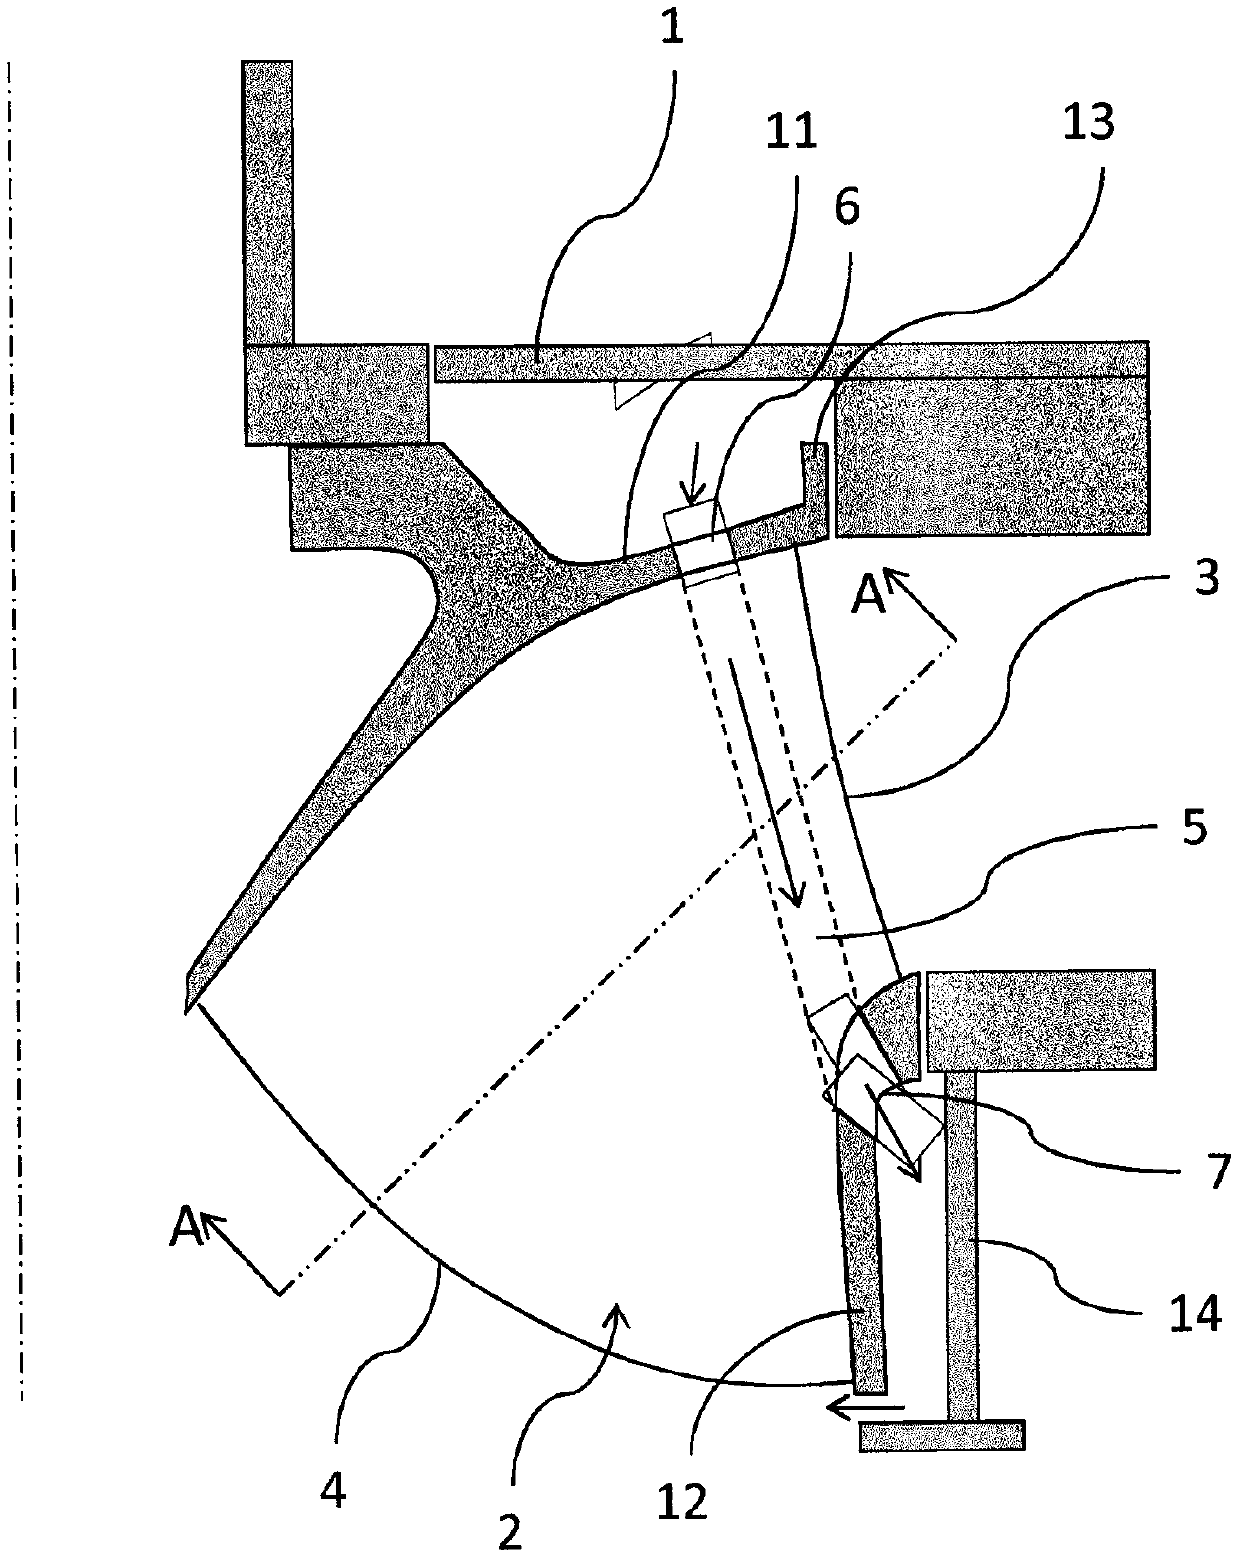 Hydraulic machine comprising a radial flow runner